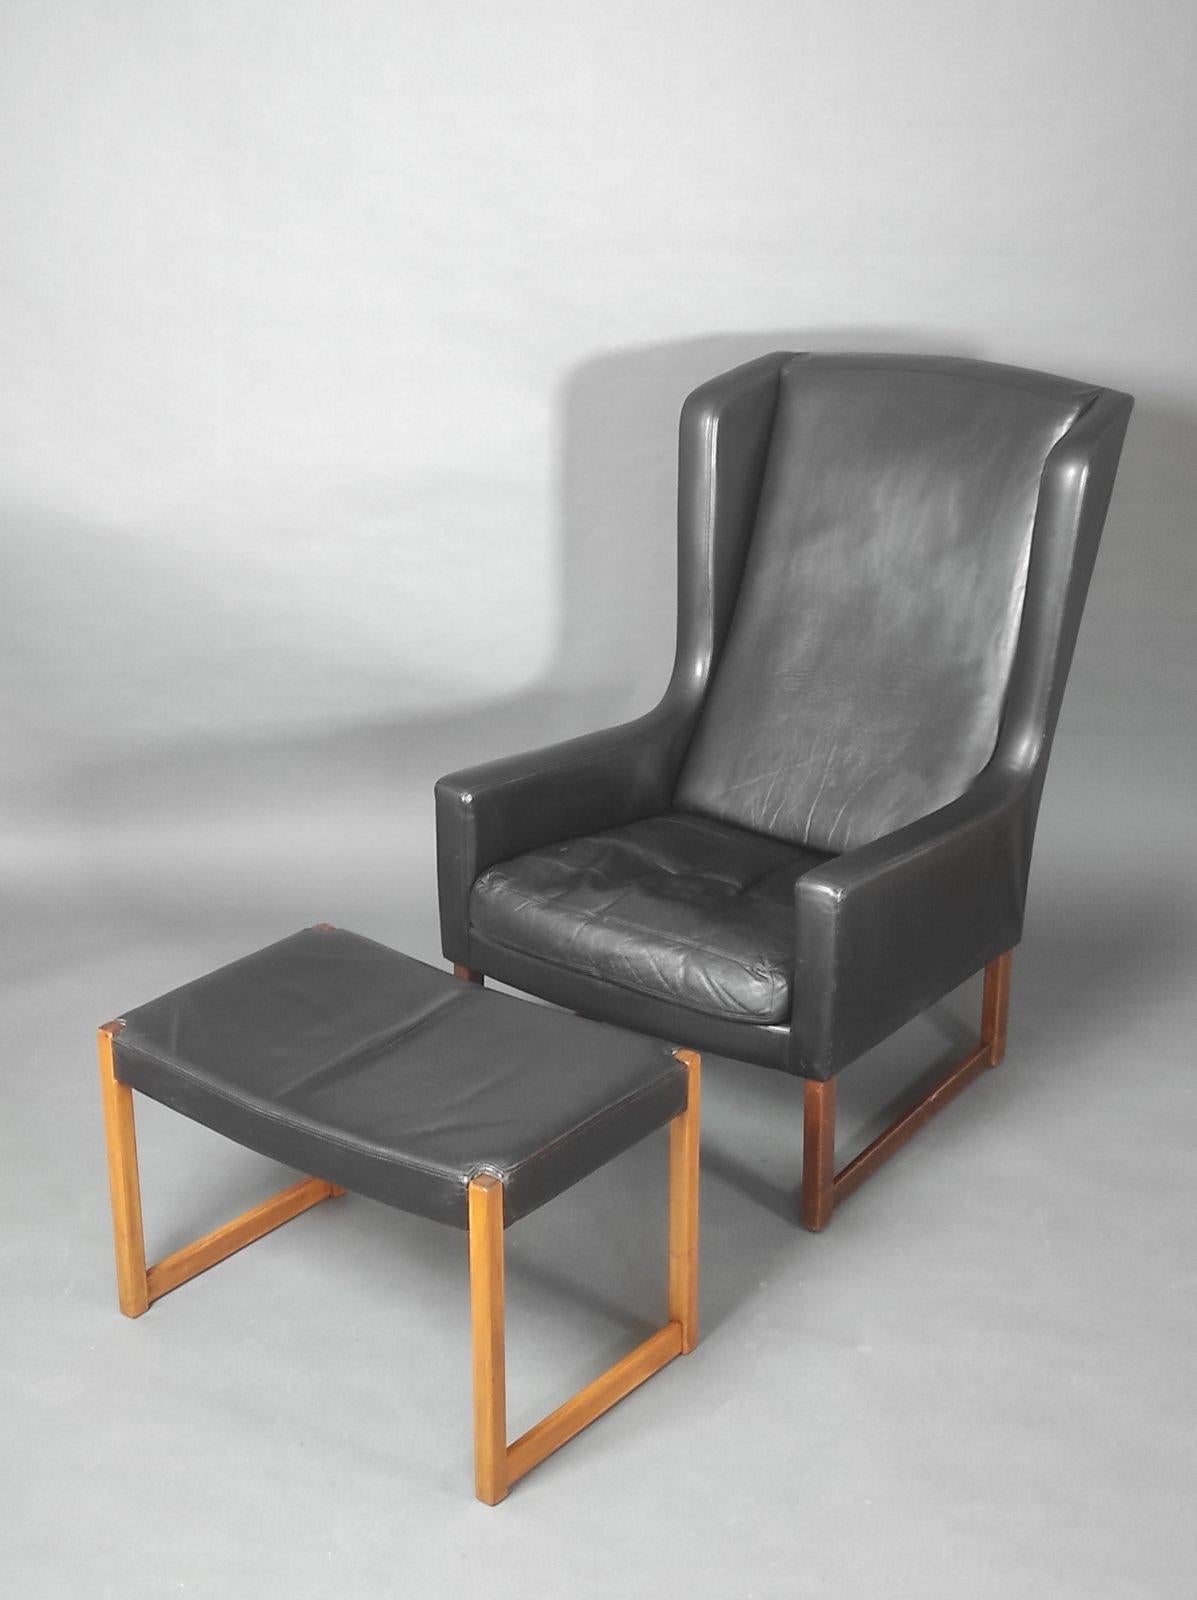 German Vintage Leather Longue Chair By Rudolf B. Glatzel for Alfred Kill 1960s For Sale